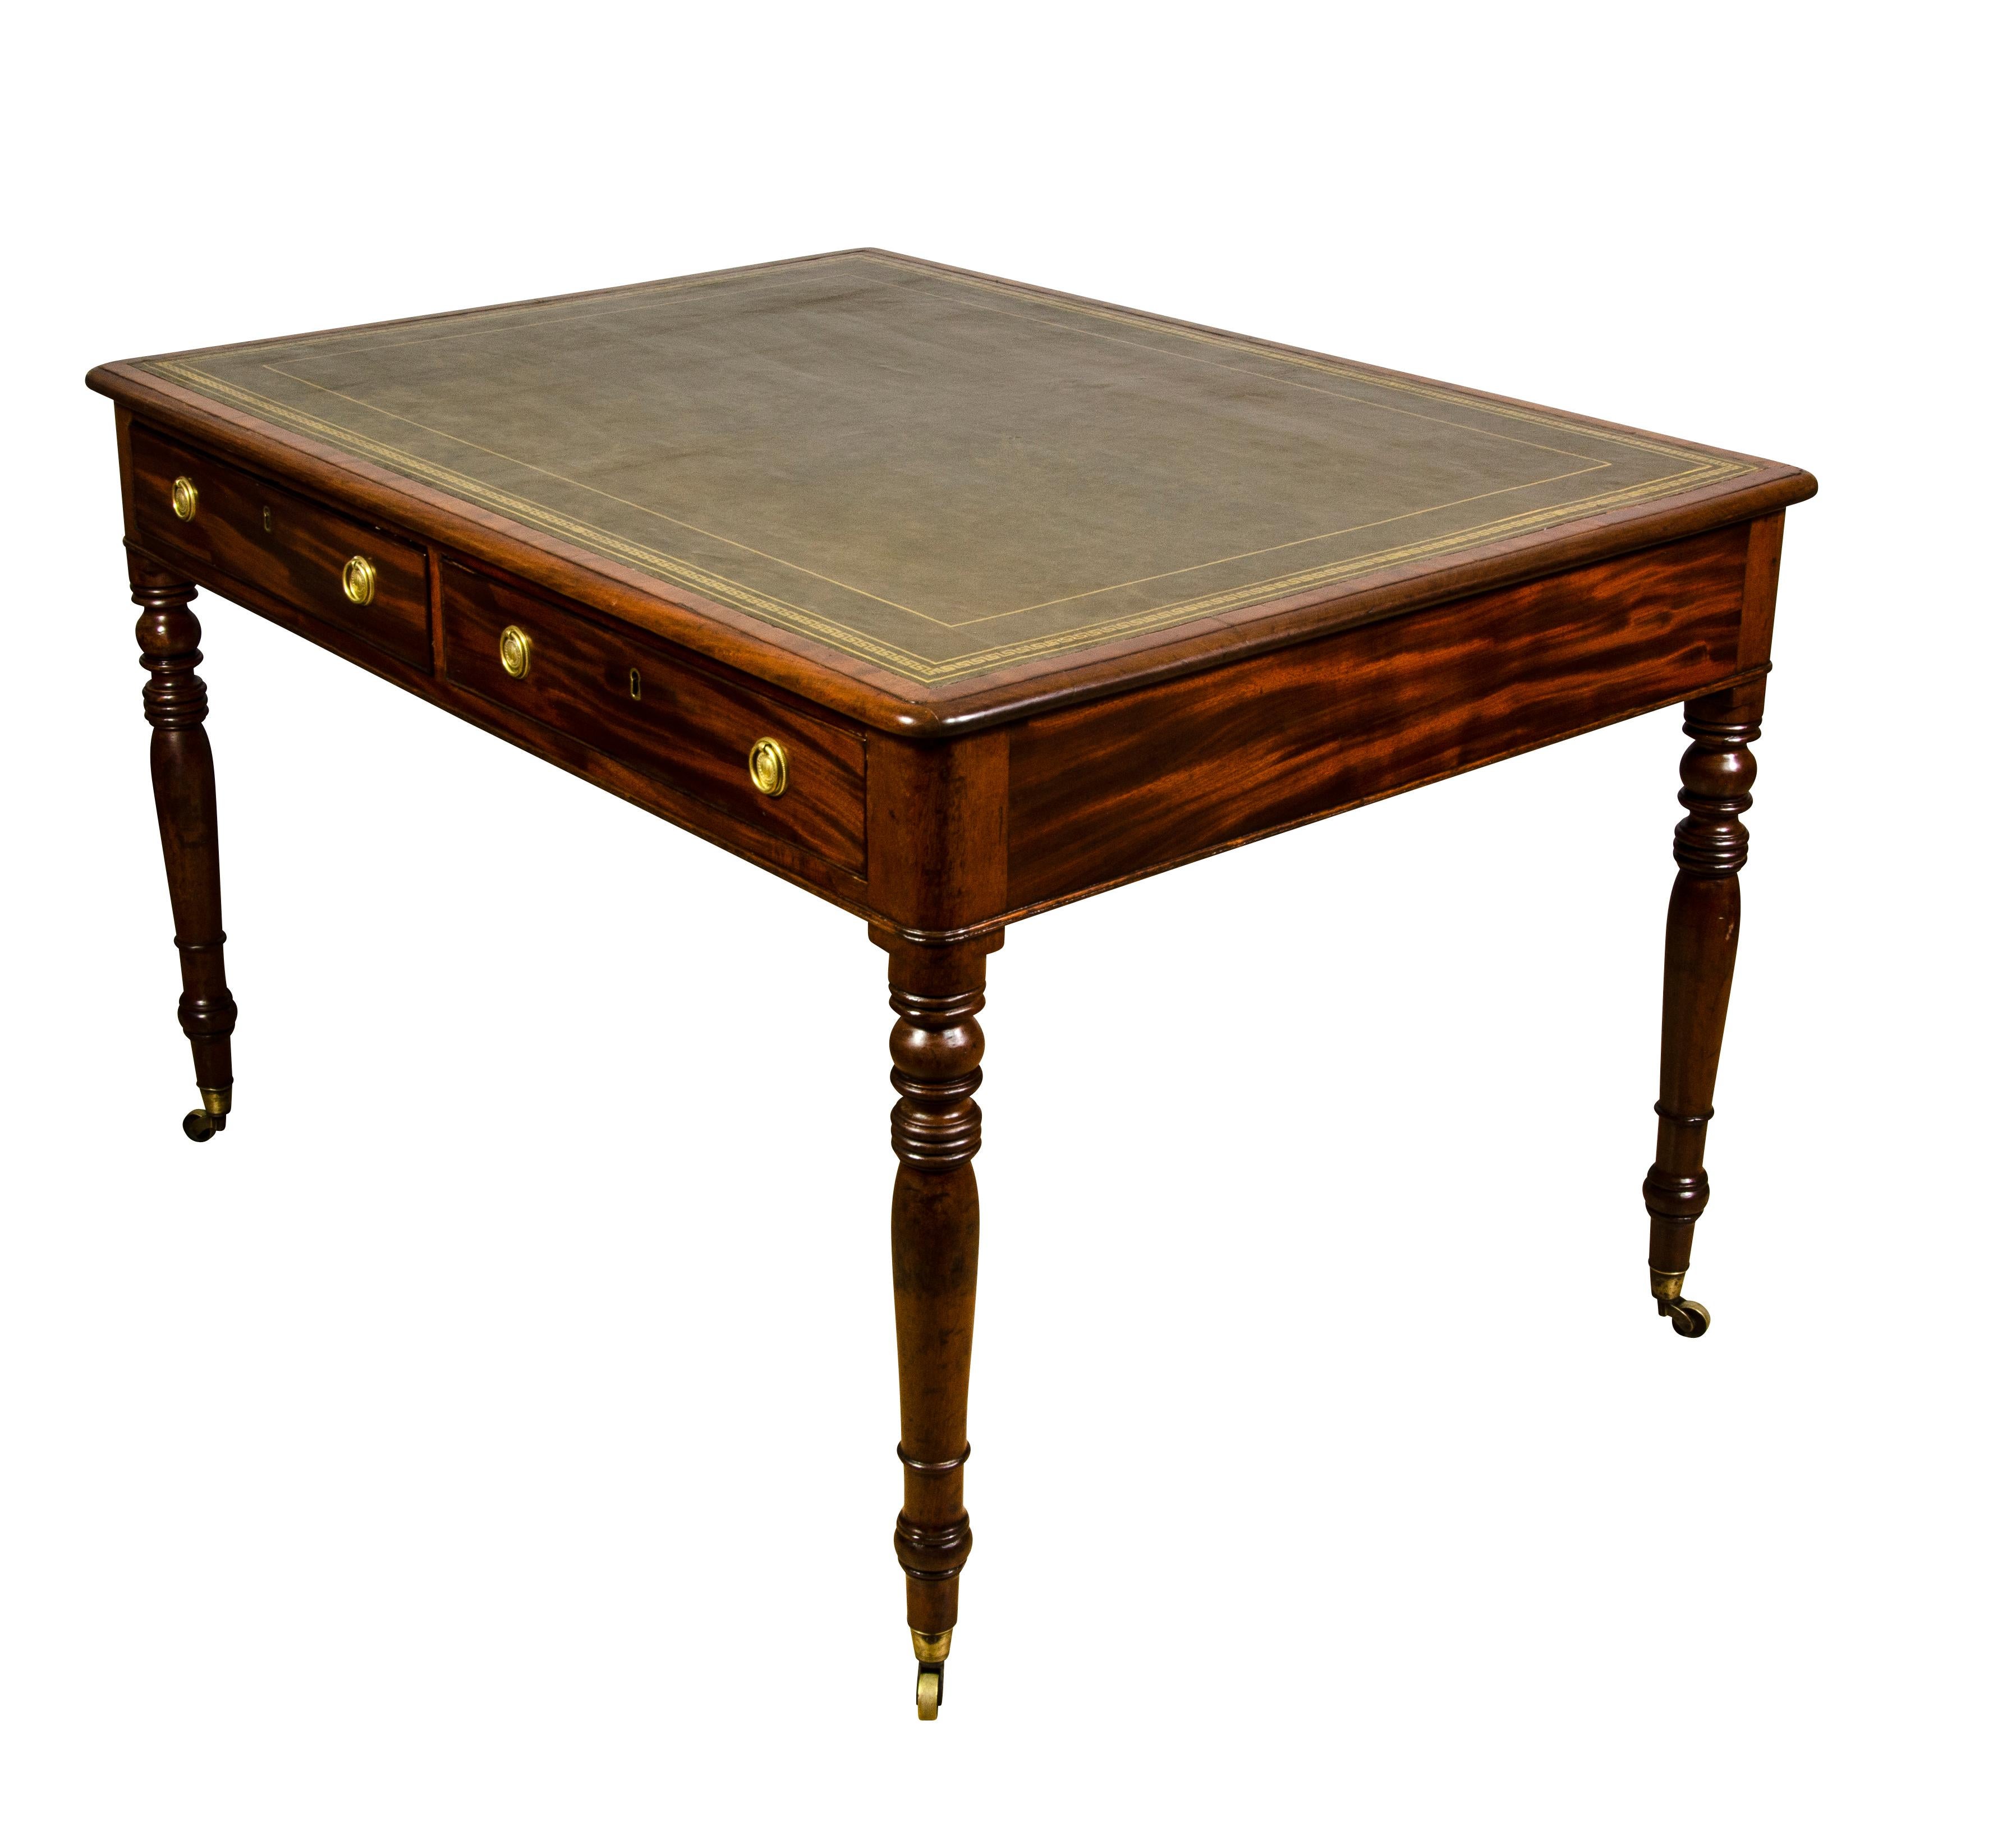 With rectangular inset green tooled leather top with cross banded and rounded edge over two drawers and opposing drawers raised on circular tapered legs and casters.